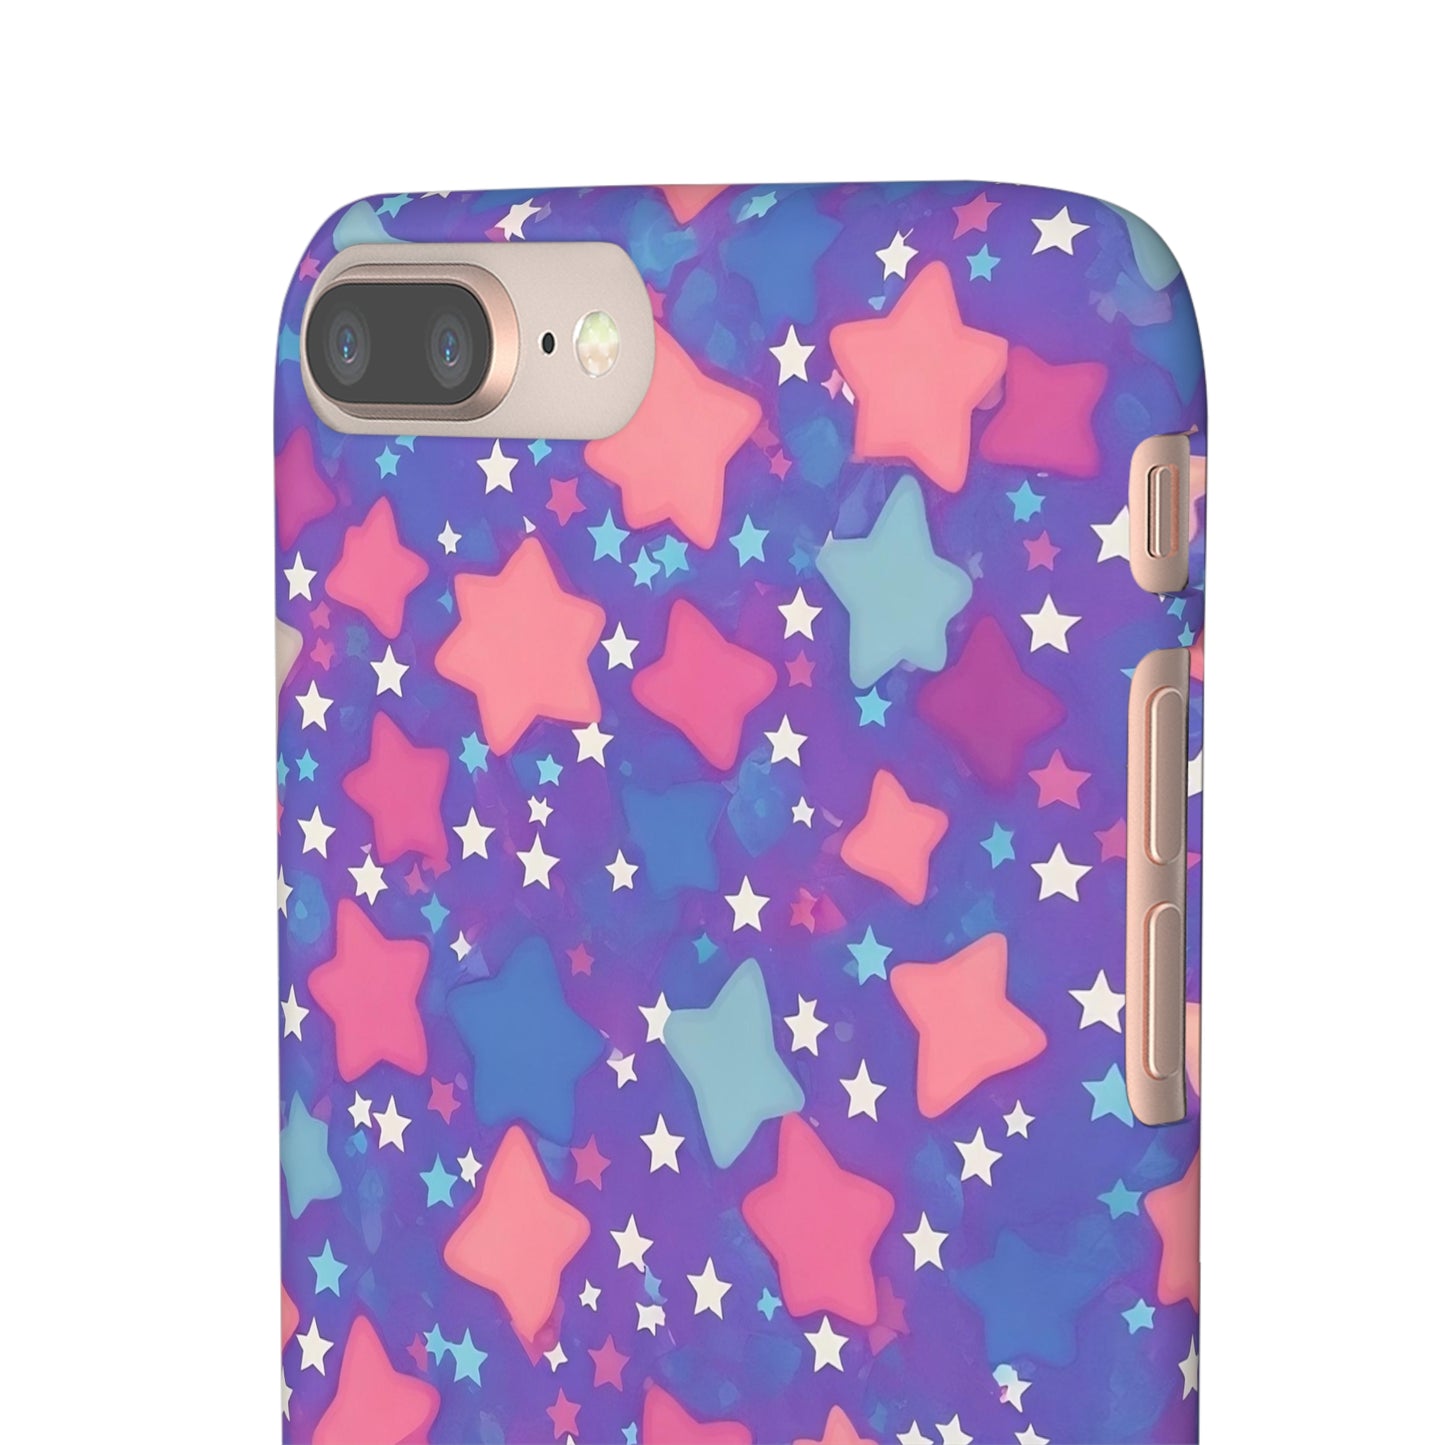 "Cosmic Sparkle" iPhone Snap Cases